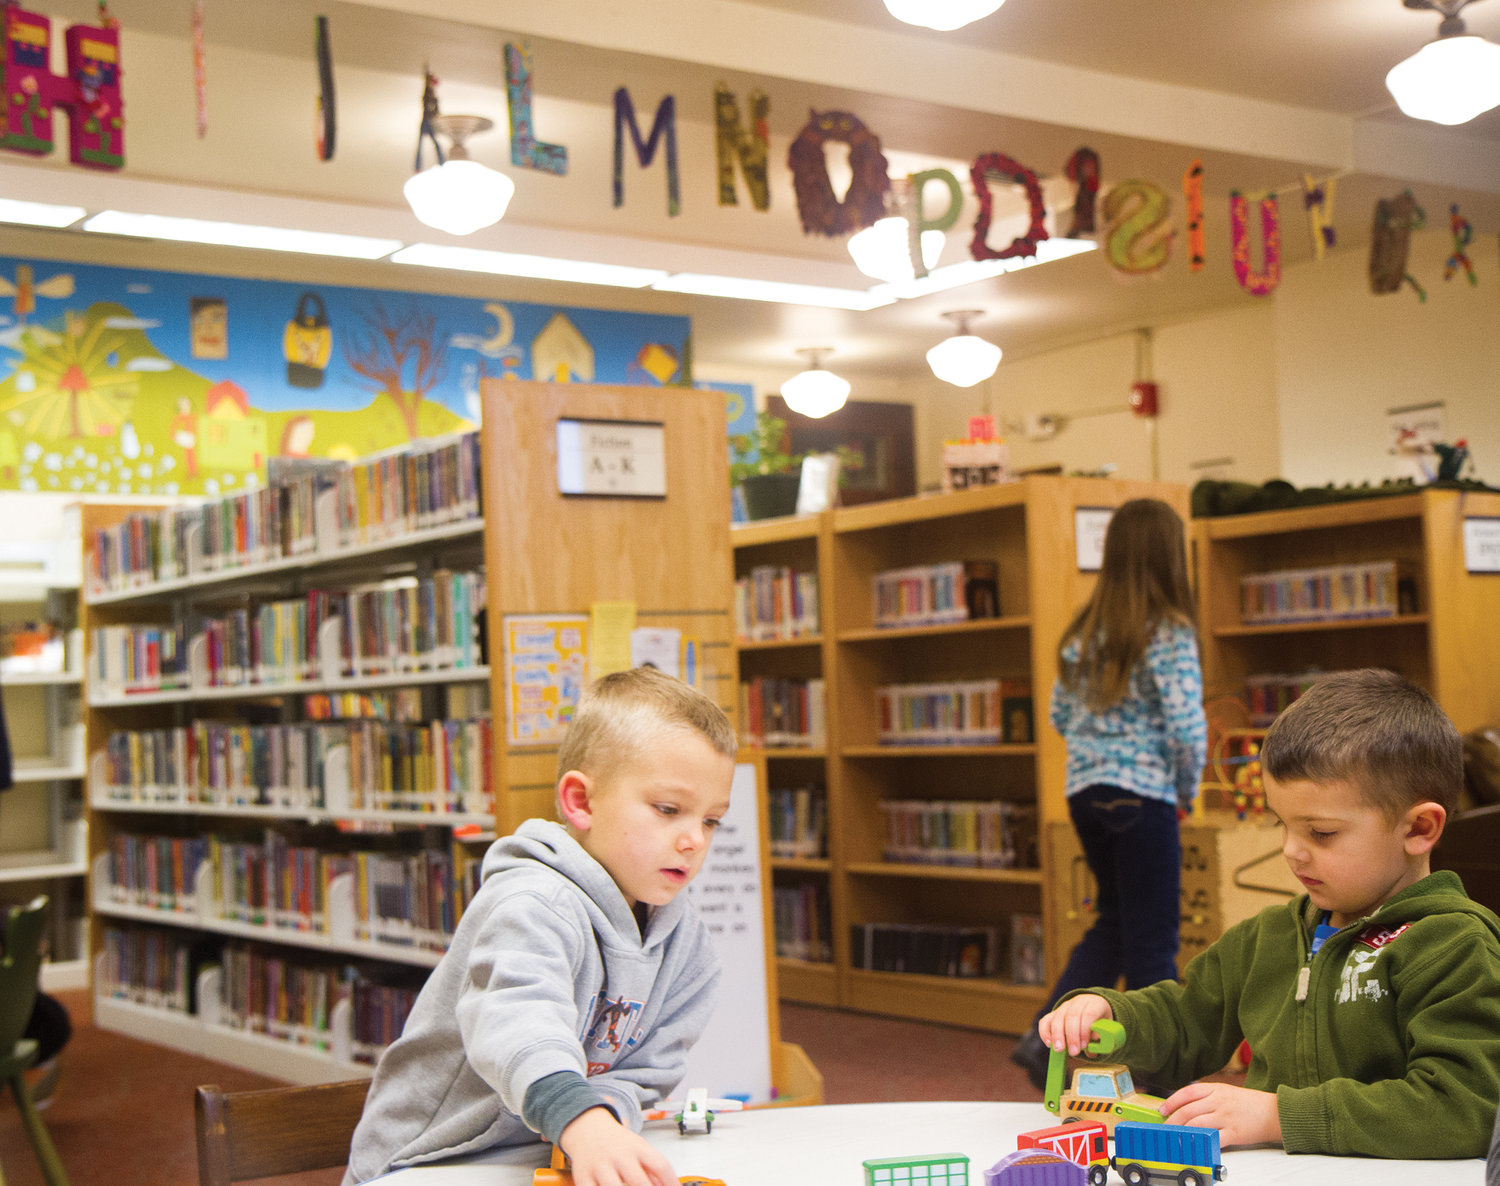 Hudson, left, and Emmett Douglas enjoy the children’s library, which is freshly decorated by the Surface Design Association, which created the 26 letters of the alphabet in fiber and paper art.